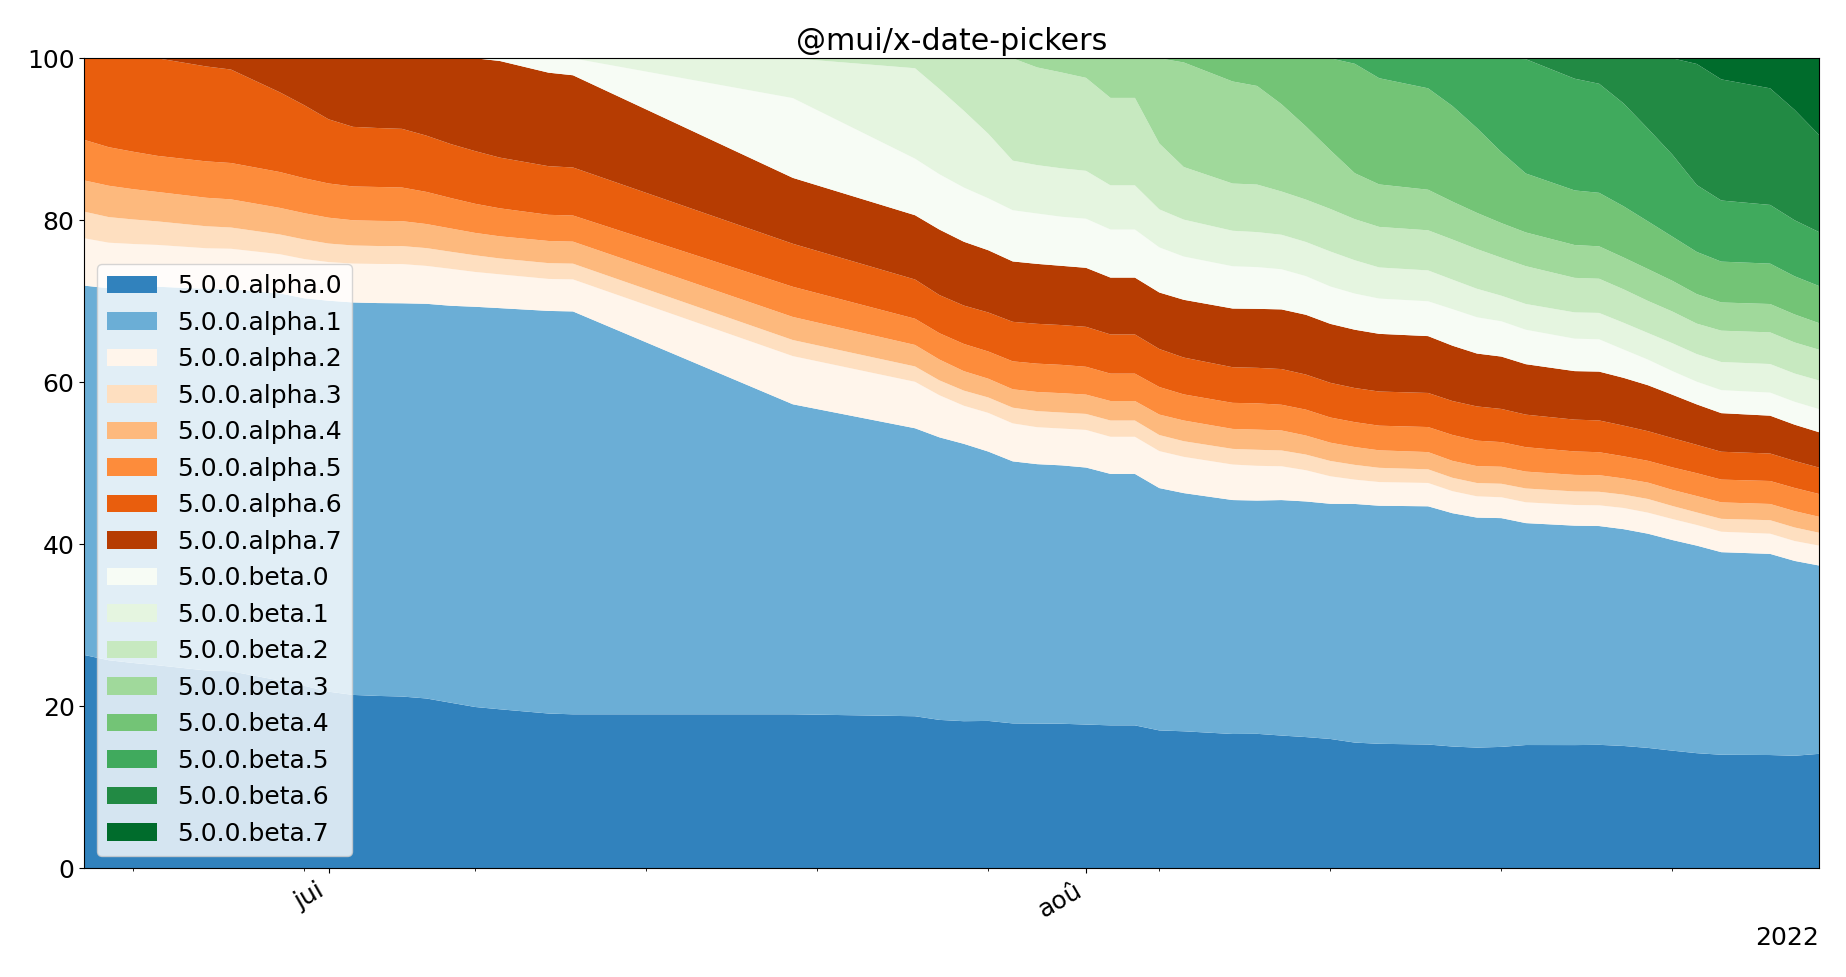 Evolution of downloaded version of @mui/x-data-pickers